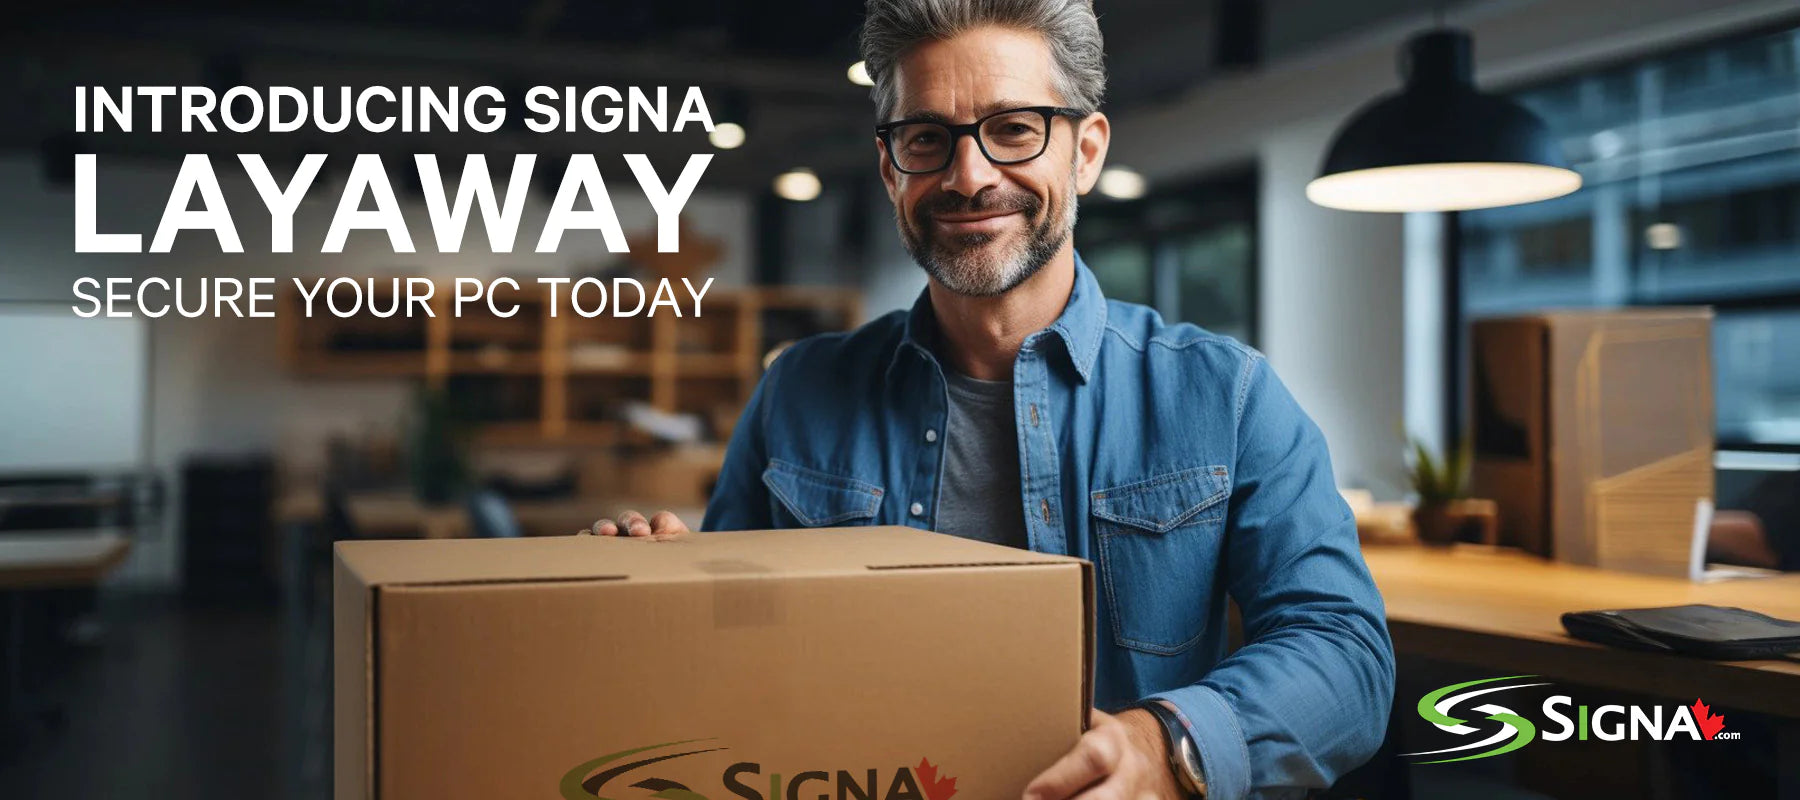 signa layaway pay now and pickup later pc toronto